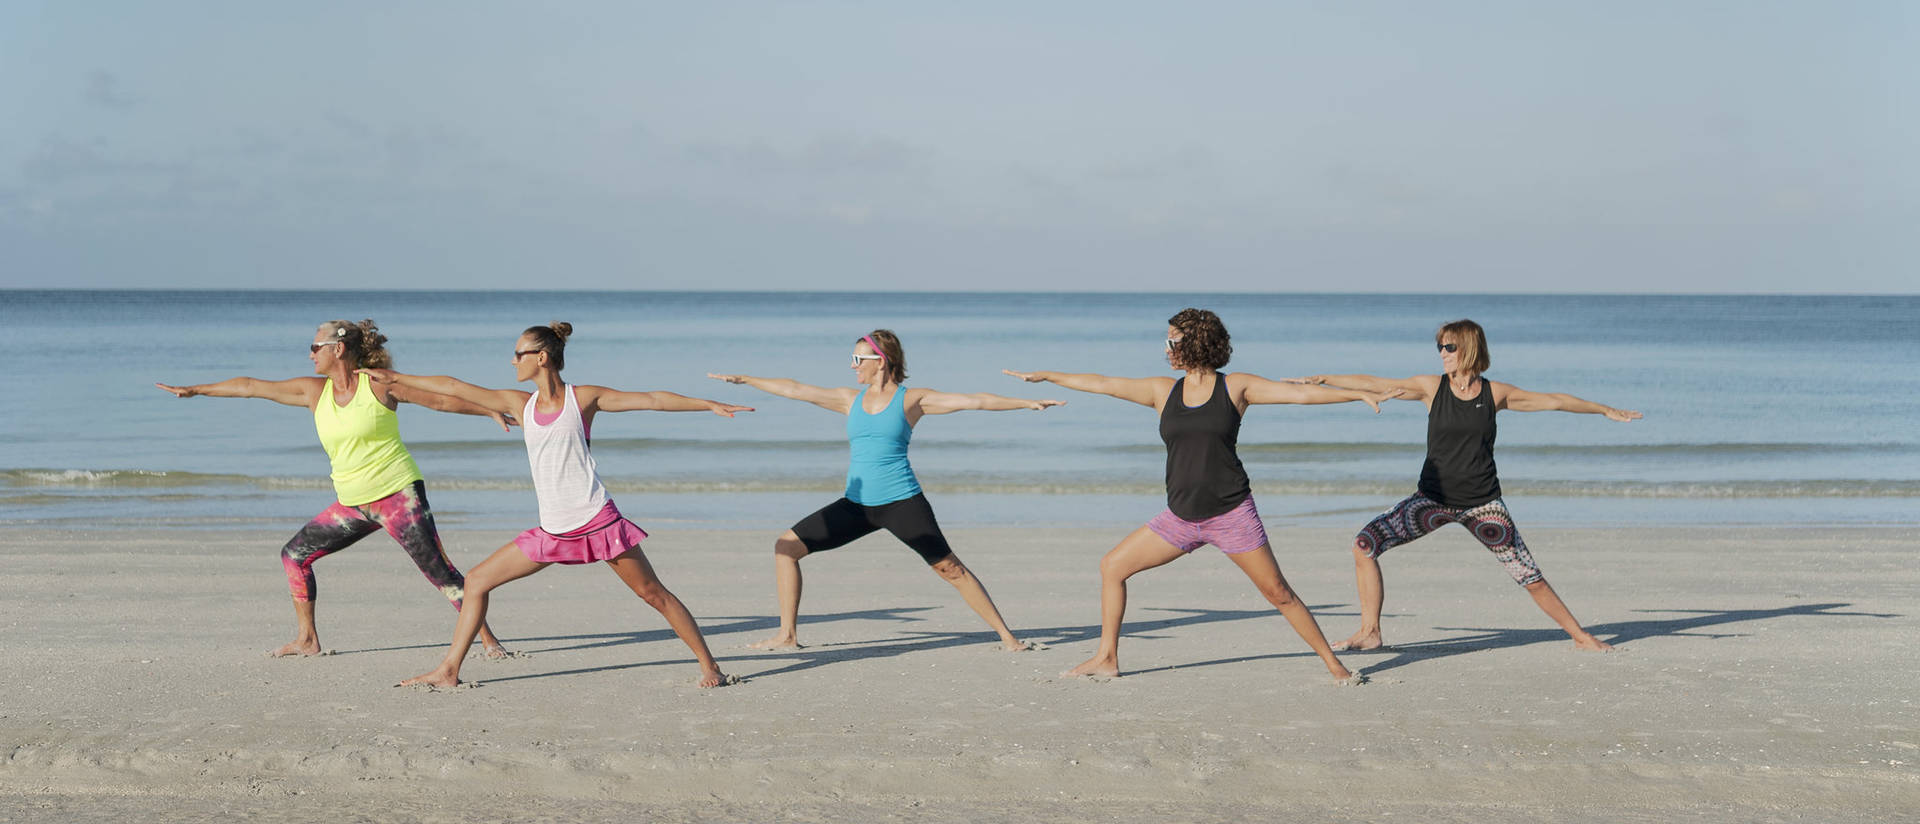 Image of people practicing yoga on beach in summer.